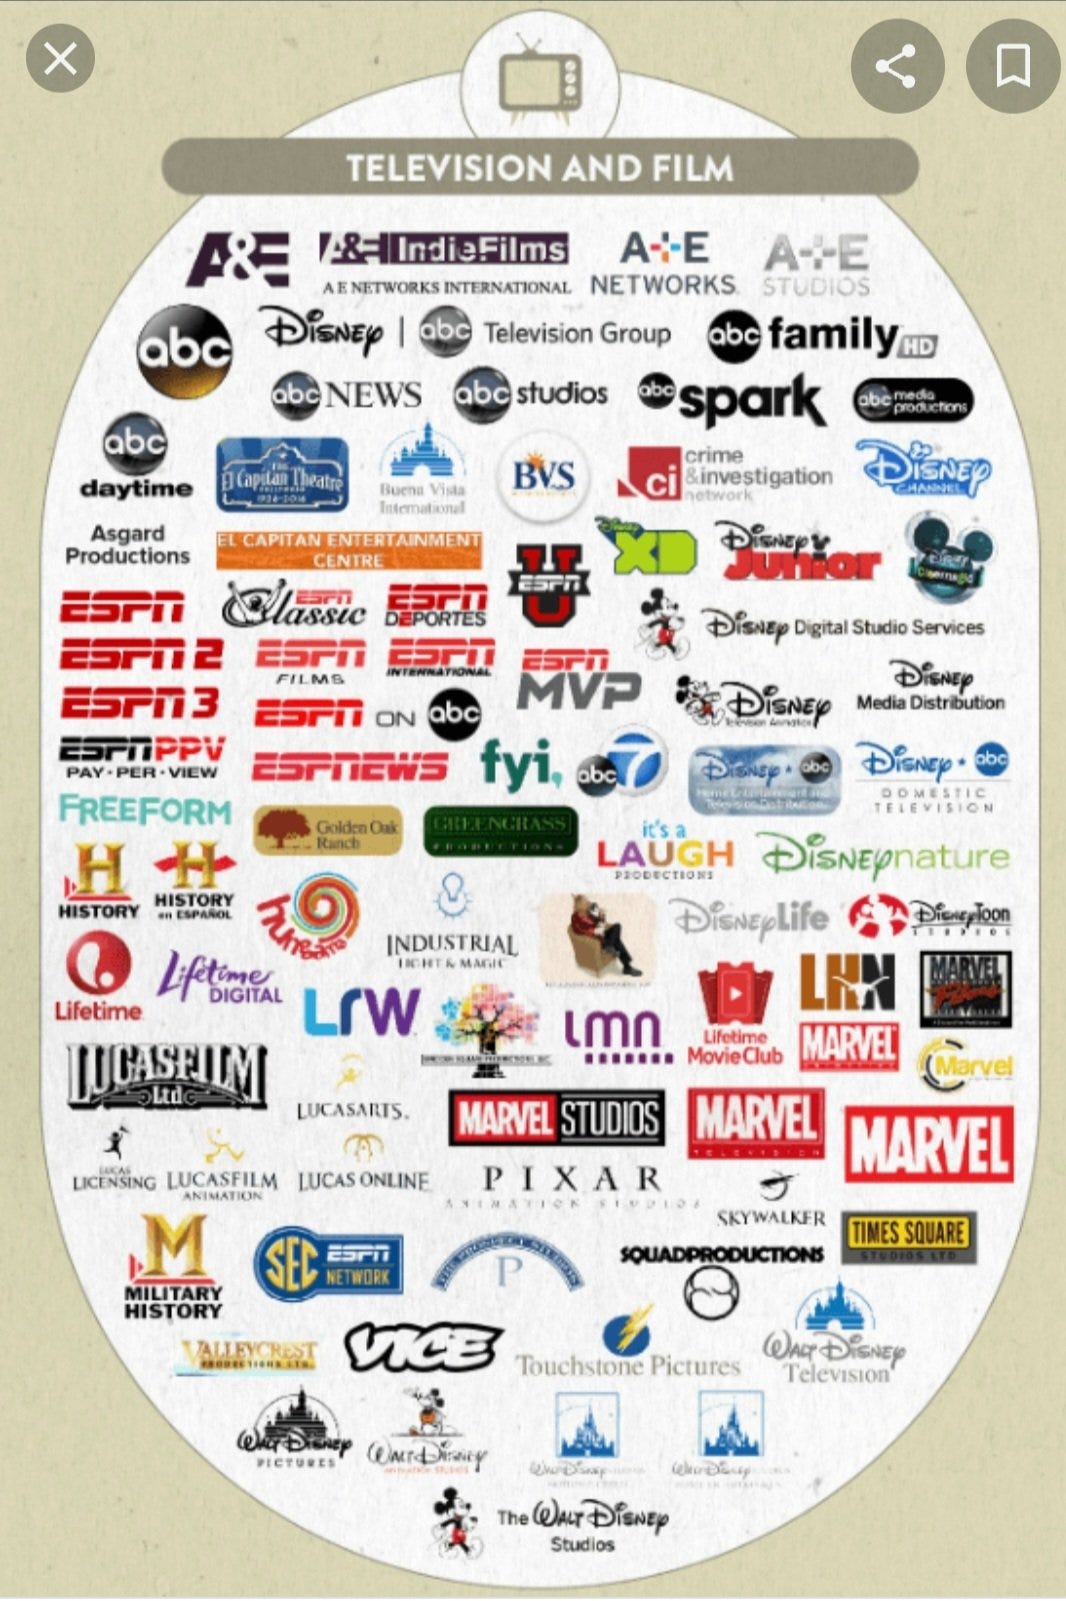 Joe Zimmerman on X: "Shocked by this list of Disney subsidiaries to learn  they not only own Disneynature and Disneylife, but Disney JUNIOR as well.  No wonder they own the six different